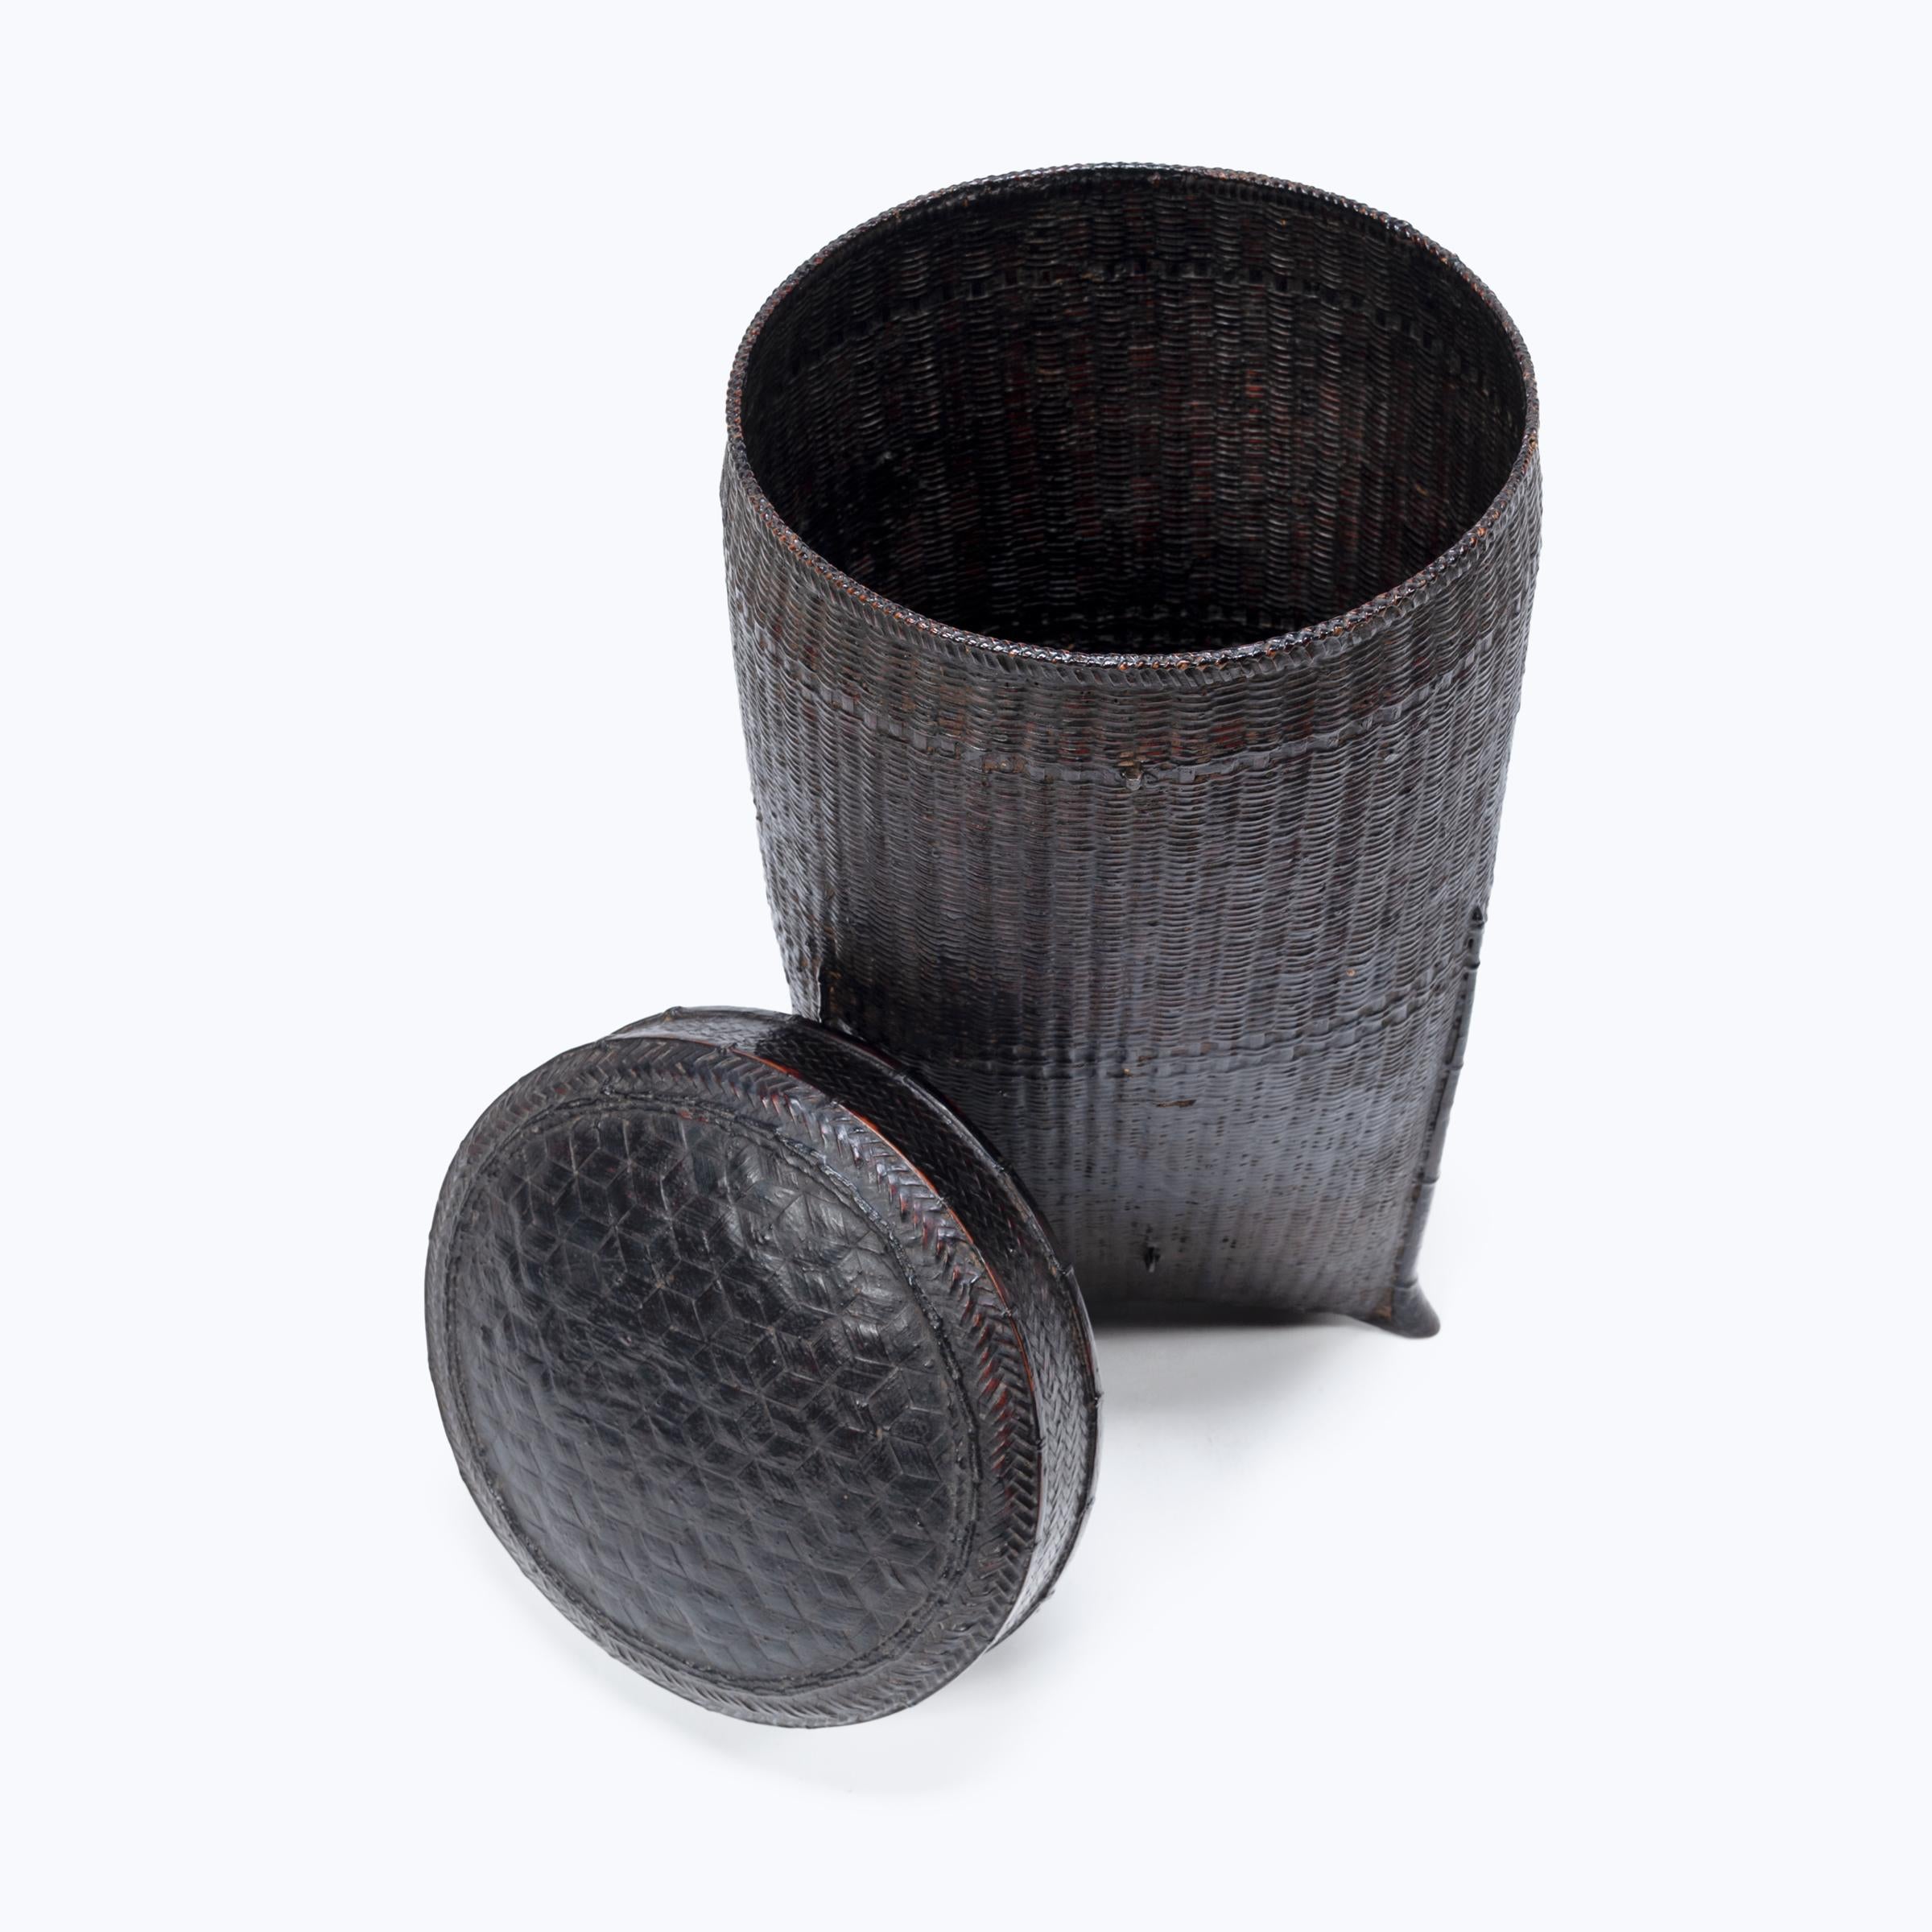 Bamboo Dark Lacquer Woven Pack Basket